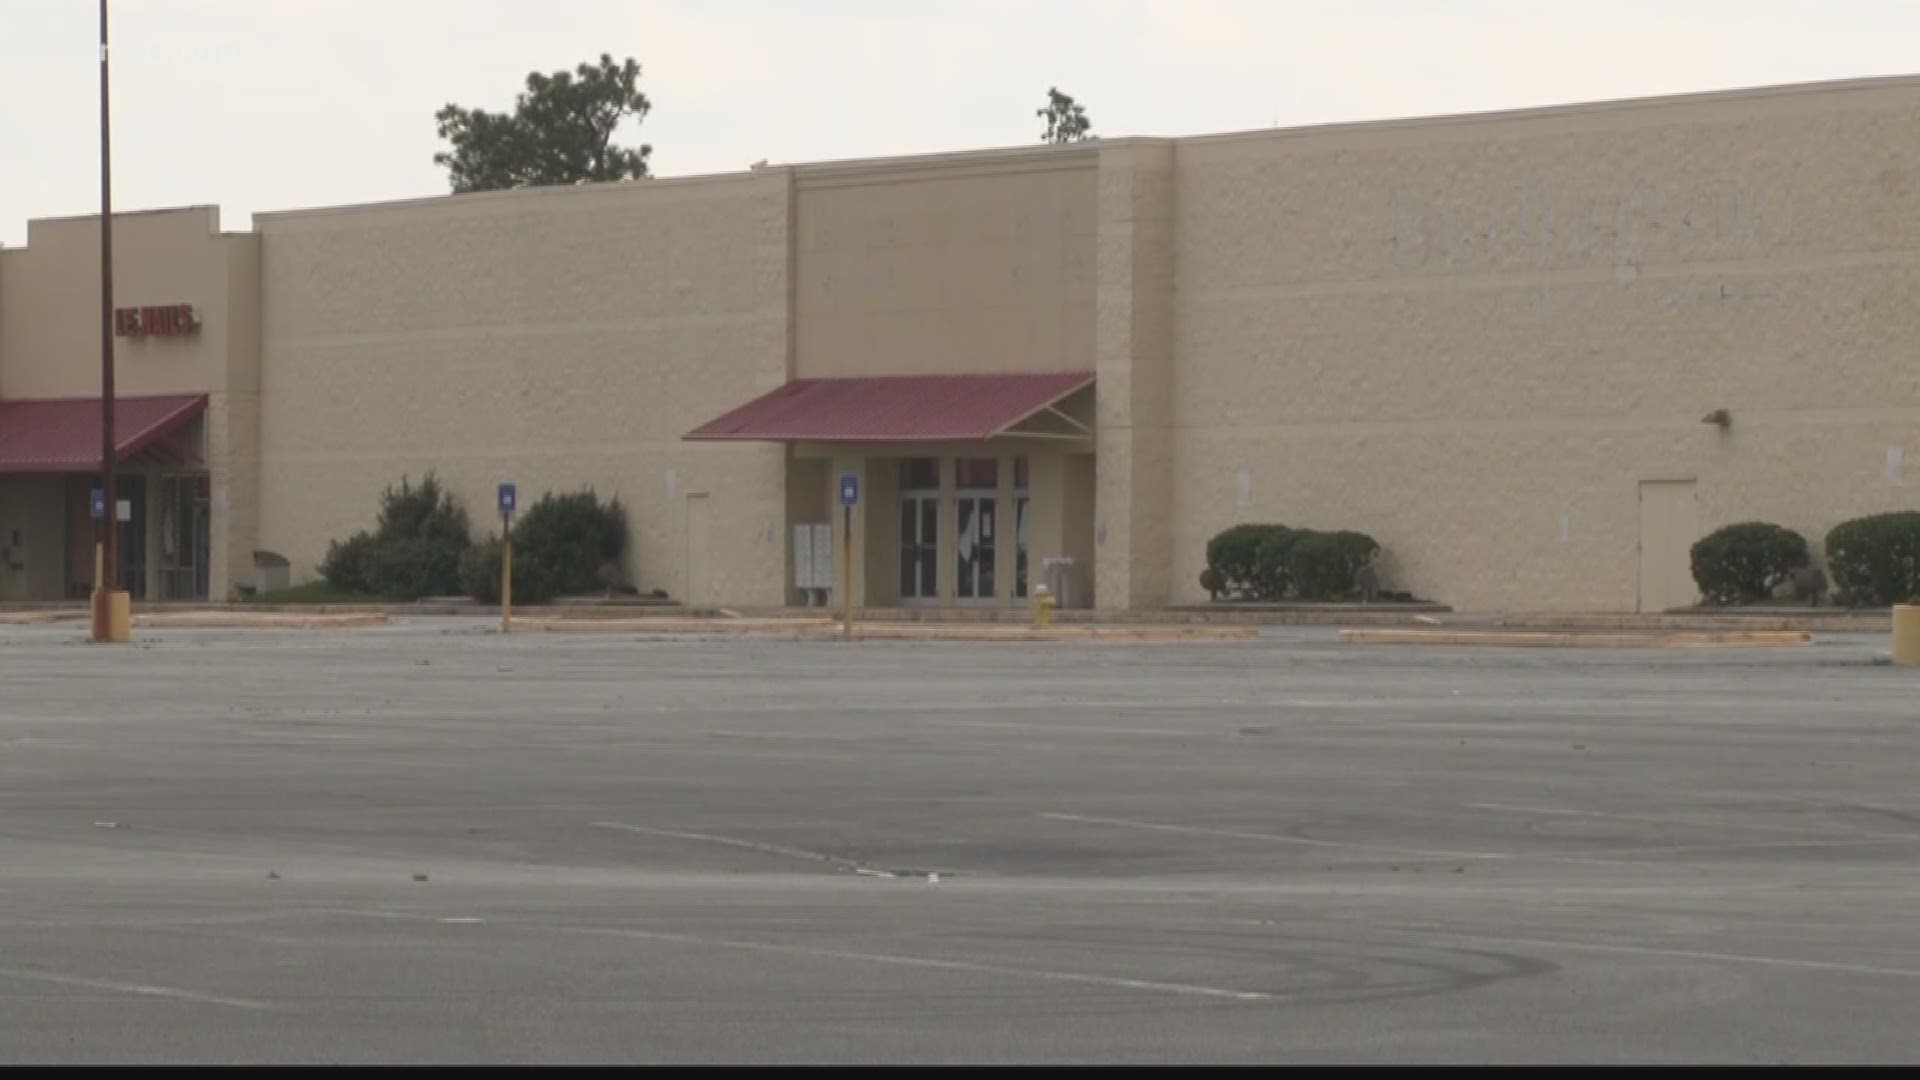 Some parking lots and buildings on Eisenhower Parkway remain empty, but the Industrial Authority says they have an idea for a new program to breathe life back into the area.